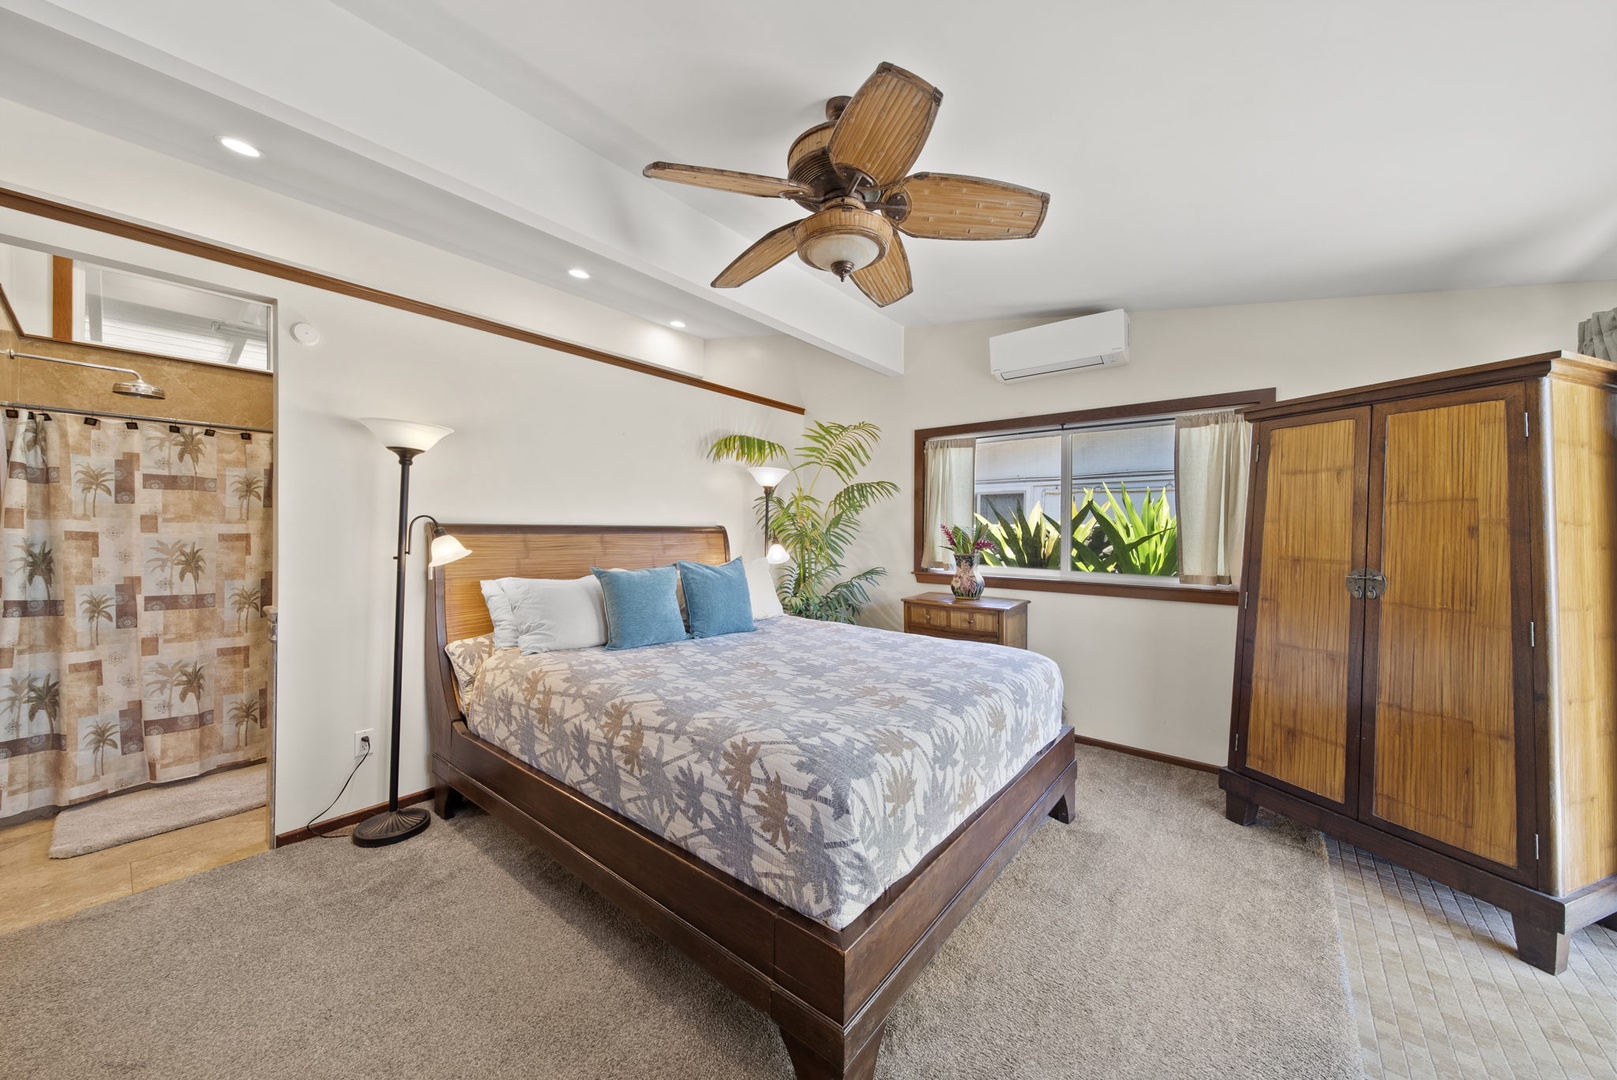 Waialua Vacation Rentals, Hale Oka Nunu - This room is equipped with split AC and a ceiling fan to keep you cool